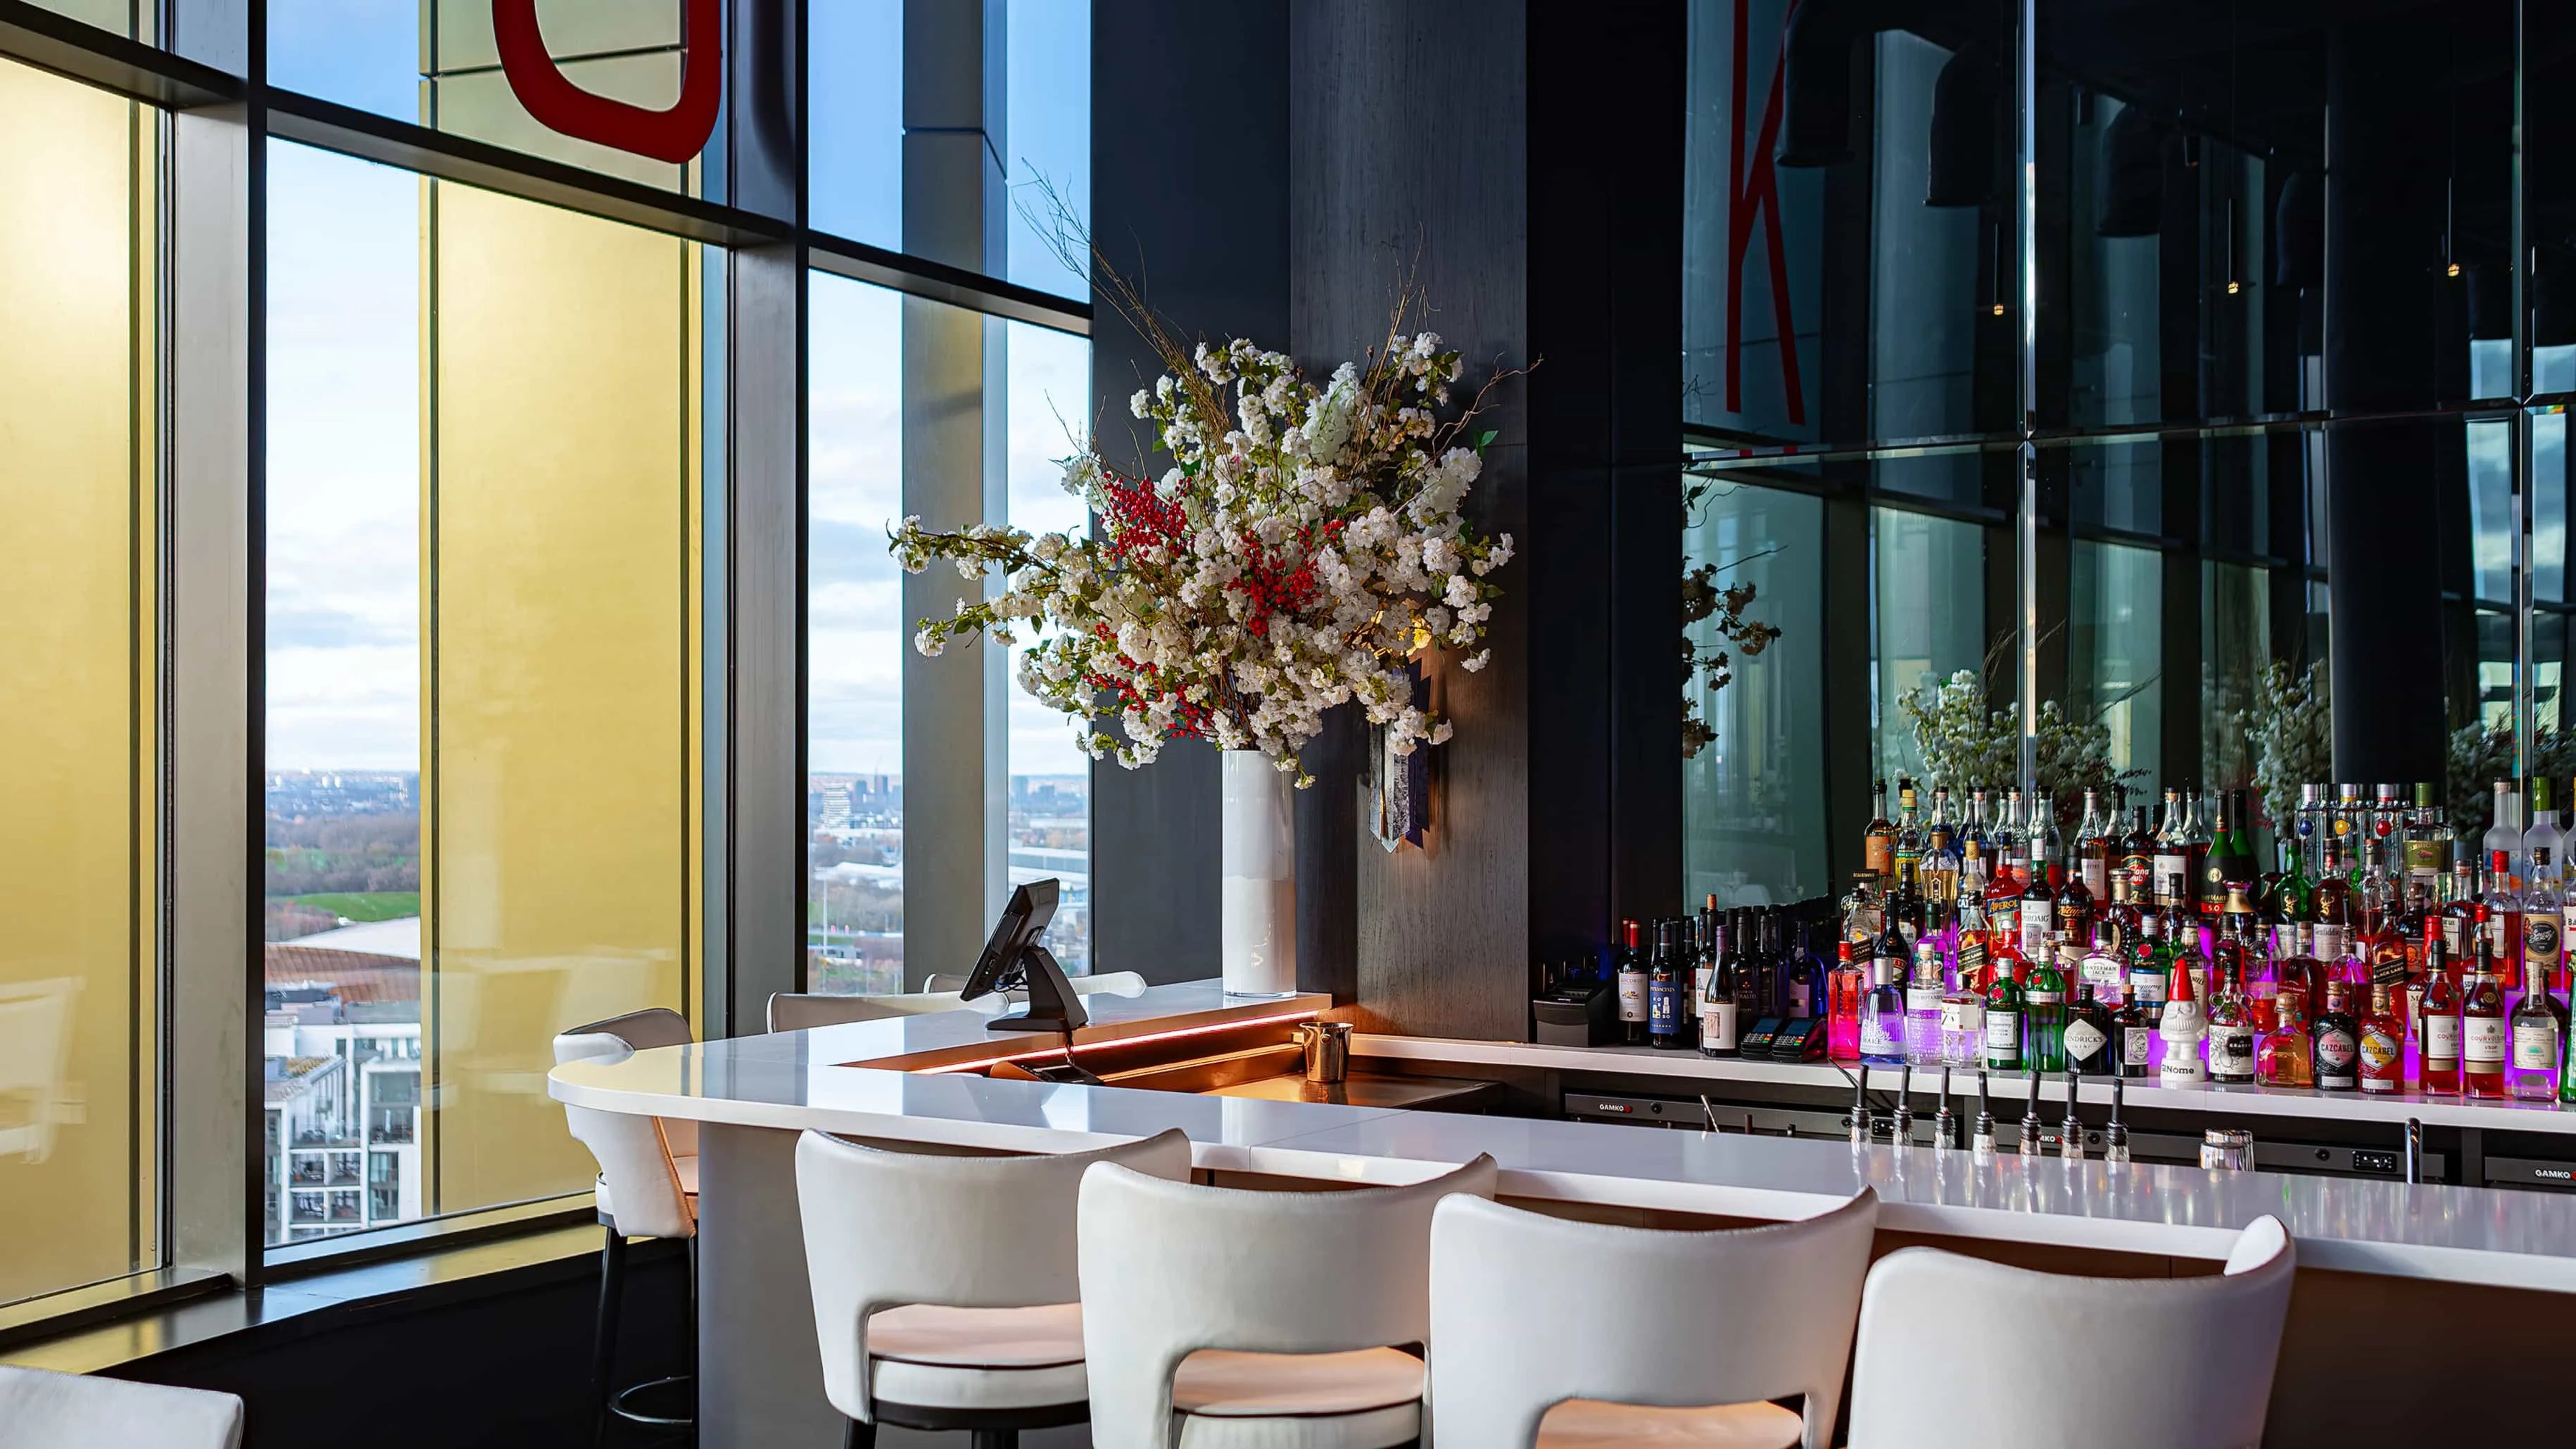 A chic bar area at STK Steakhouse with a stylish floral arrangement in a white vase, overlooking a city landscape through large windows, alongside modern furniture and a well-stocked bar.